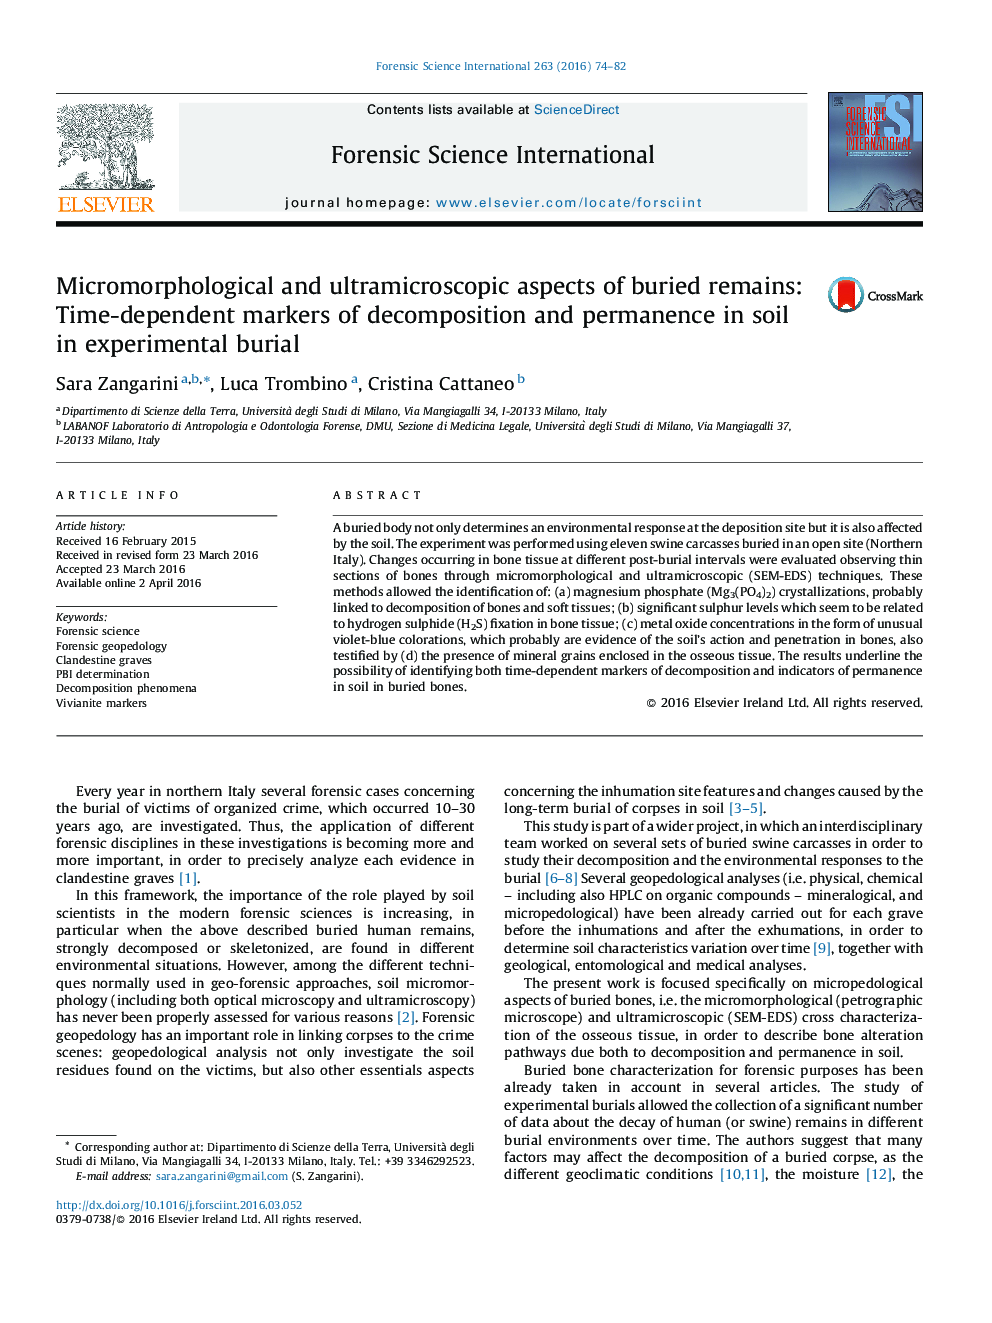 Micromorphological and ultramicroscopic aspects of buried remains: Time-dependent markers of decomposition and permanence in soil in experimental burial